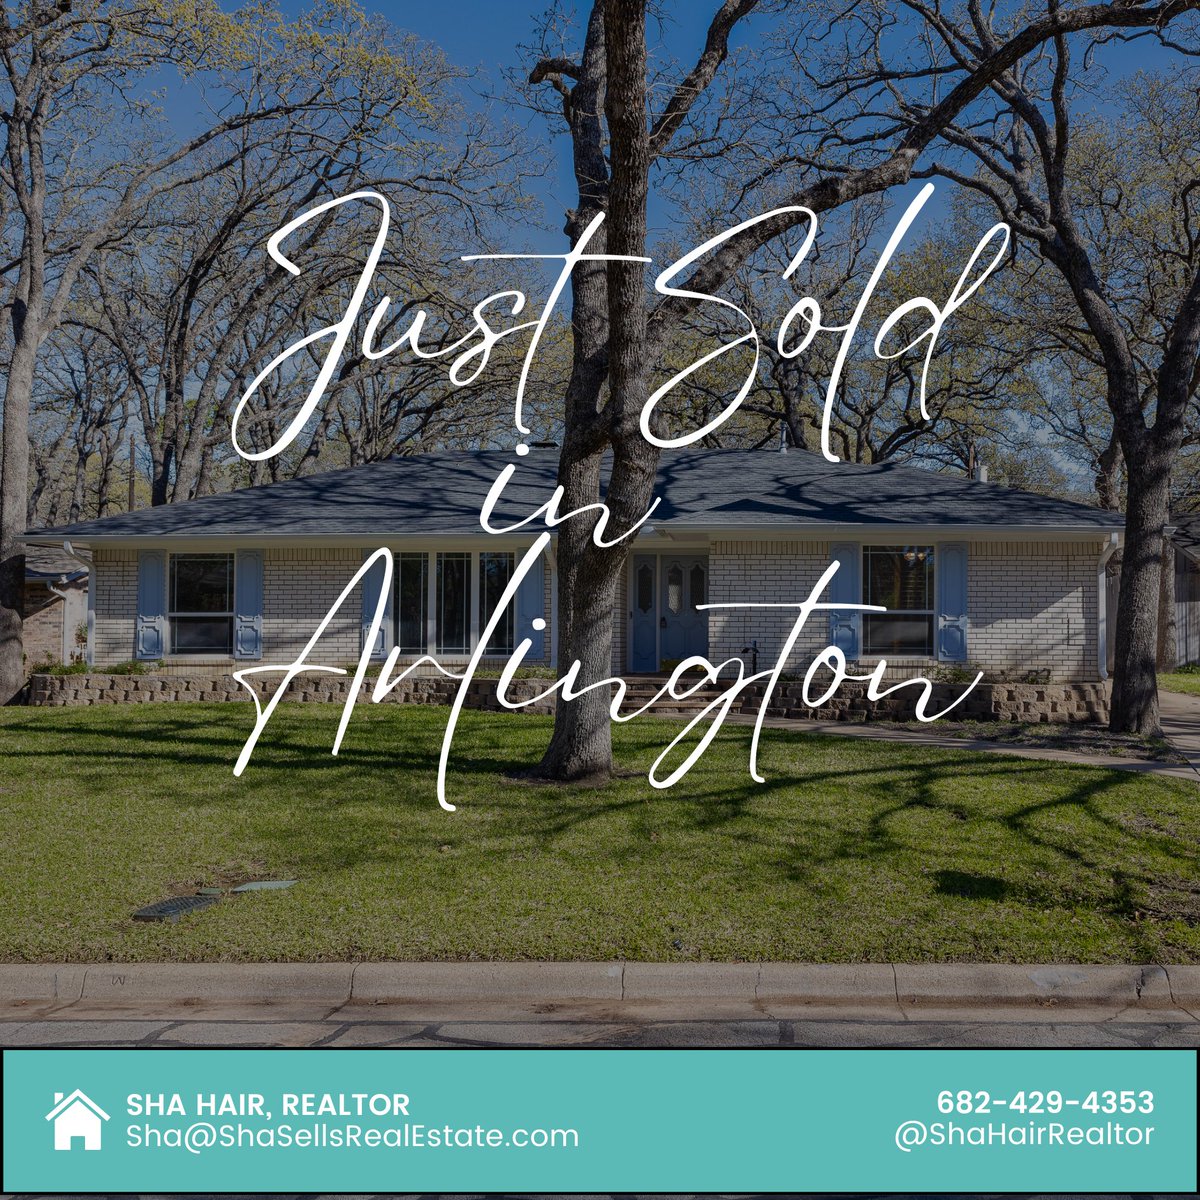 Just Sold in Arlington!🎉
Looking to sell your home?  
Contact me and we can talk about your options!
📲682-429-4353

#justsold #justsoldit #sellersagent #dfwrealtor #texasrealtor #shahairrealtor #shasellsrealestate